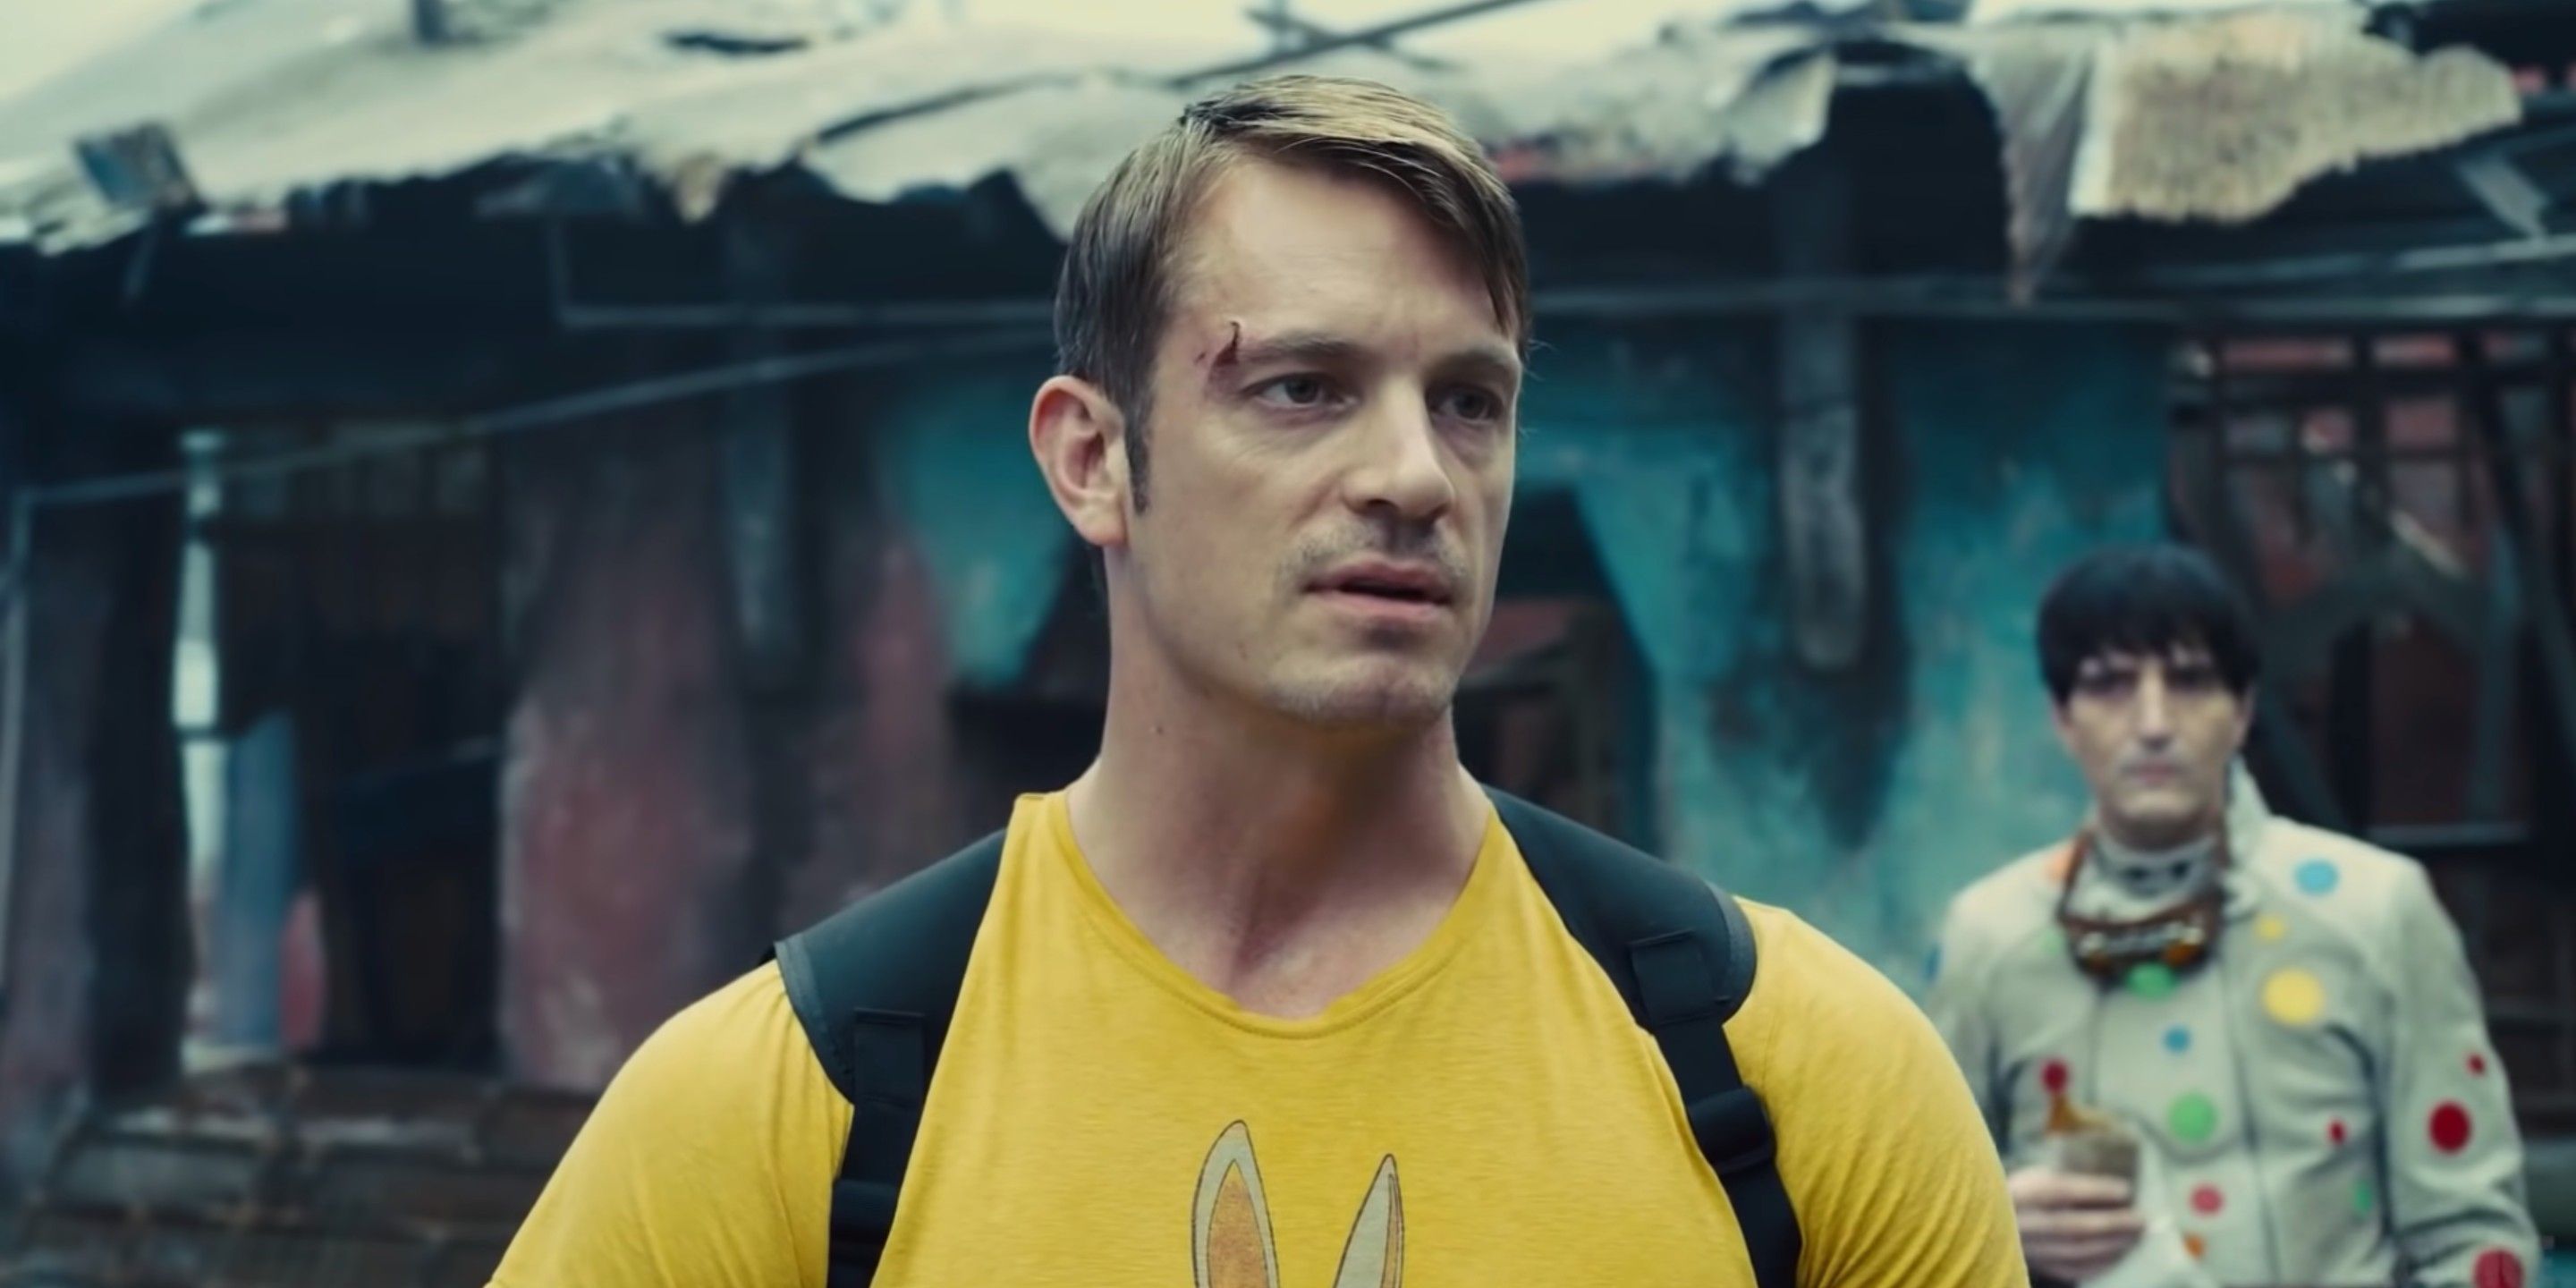 Joel Kinnaman as Rick Flag in The Suicide Squad